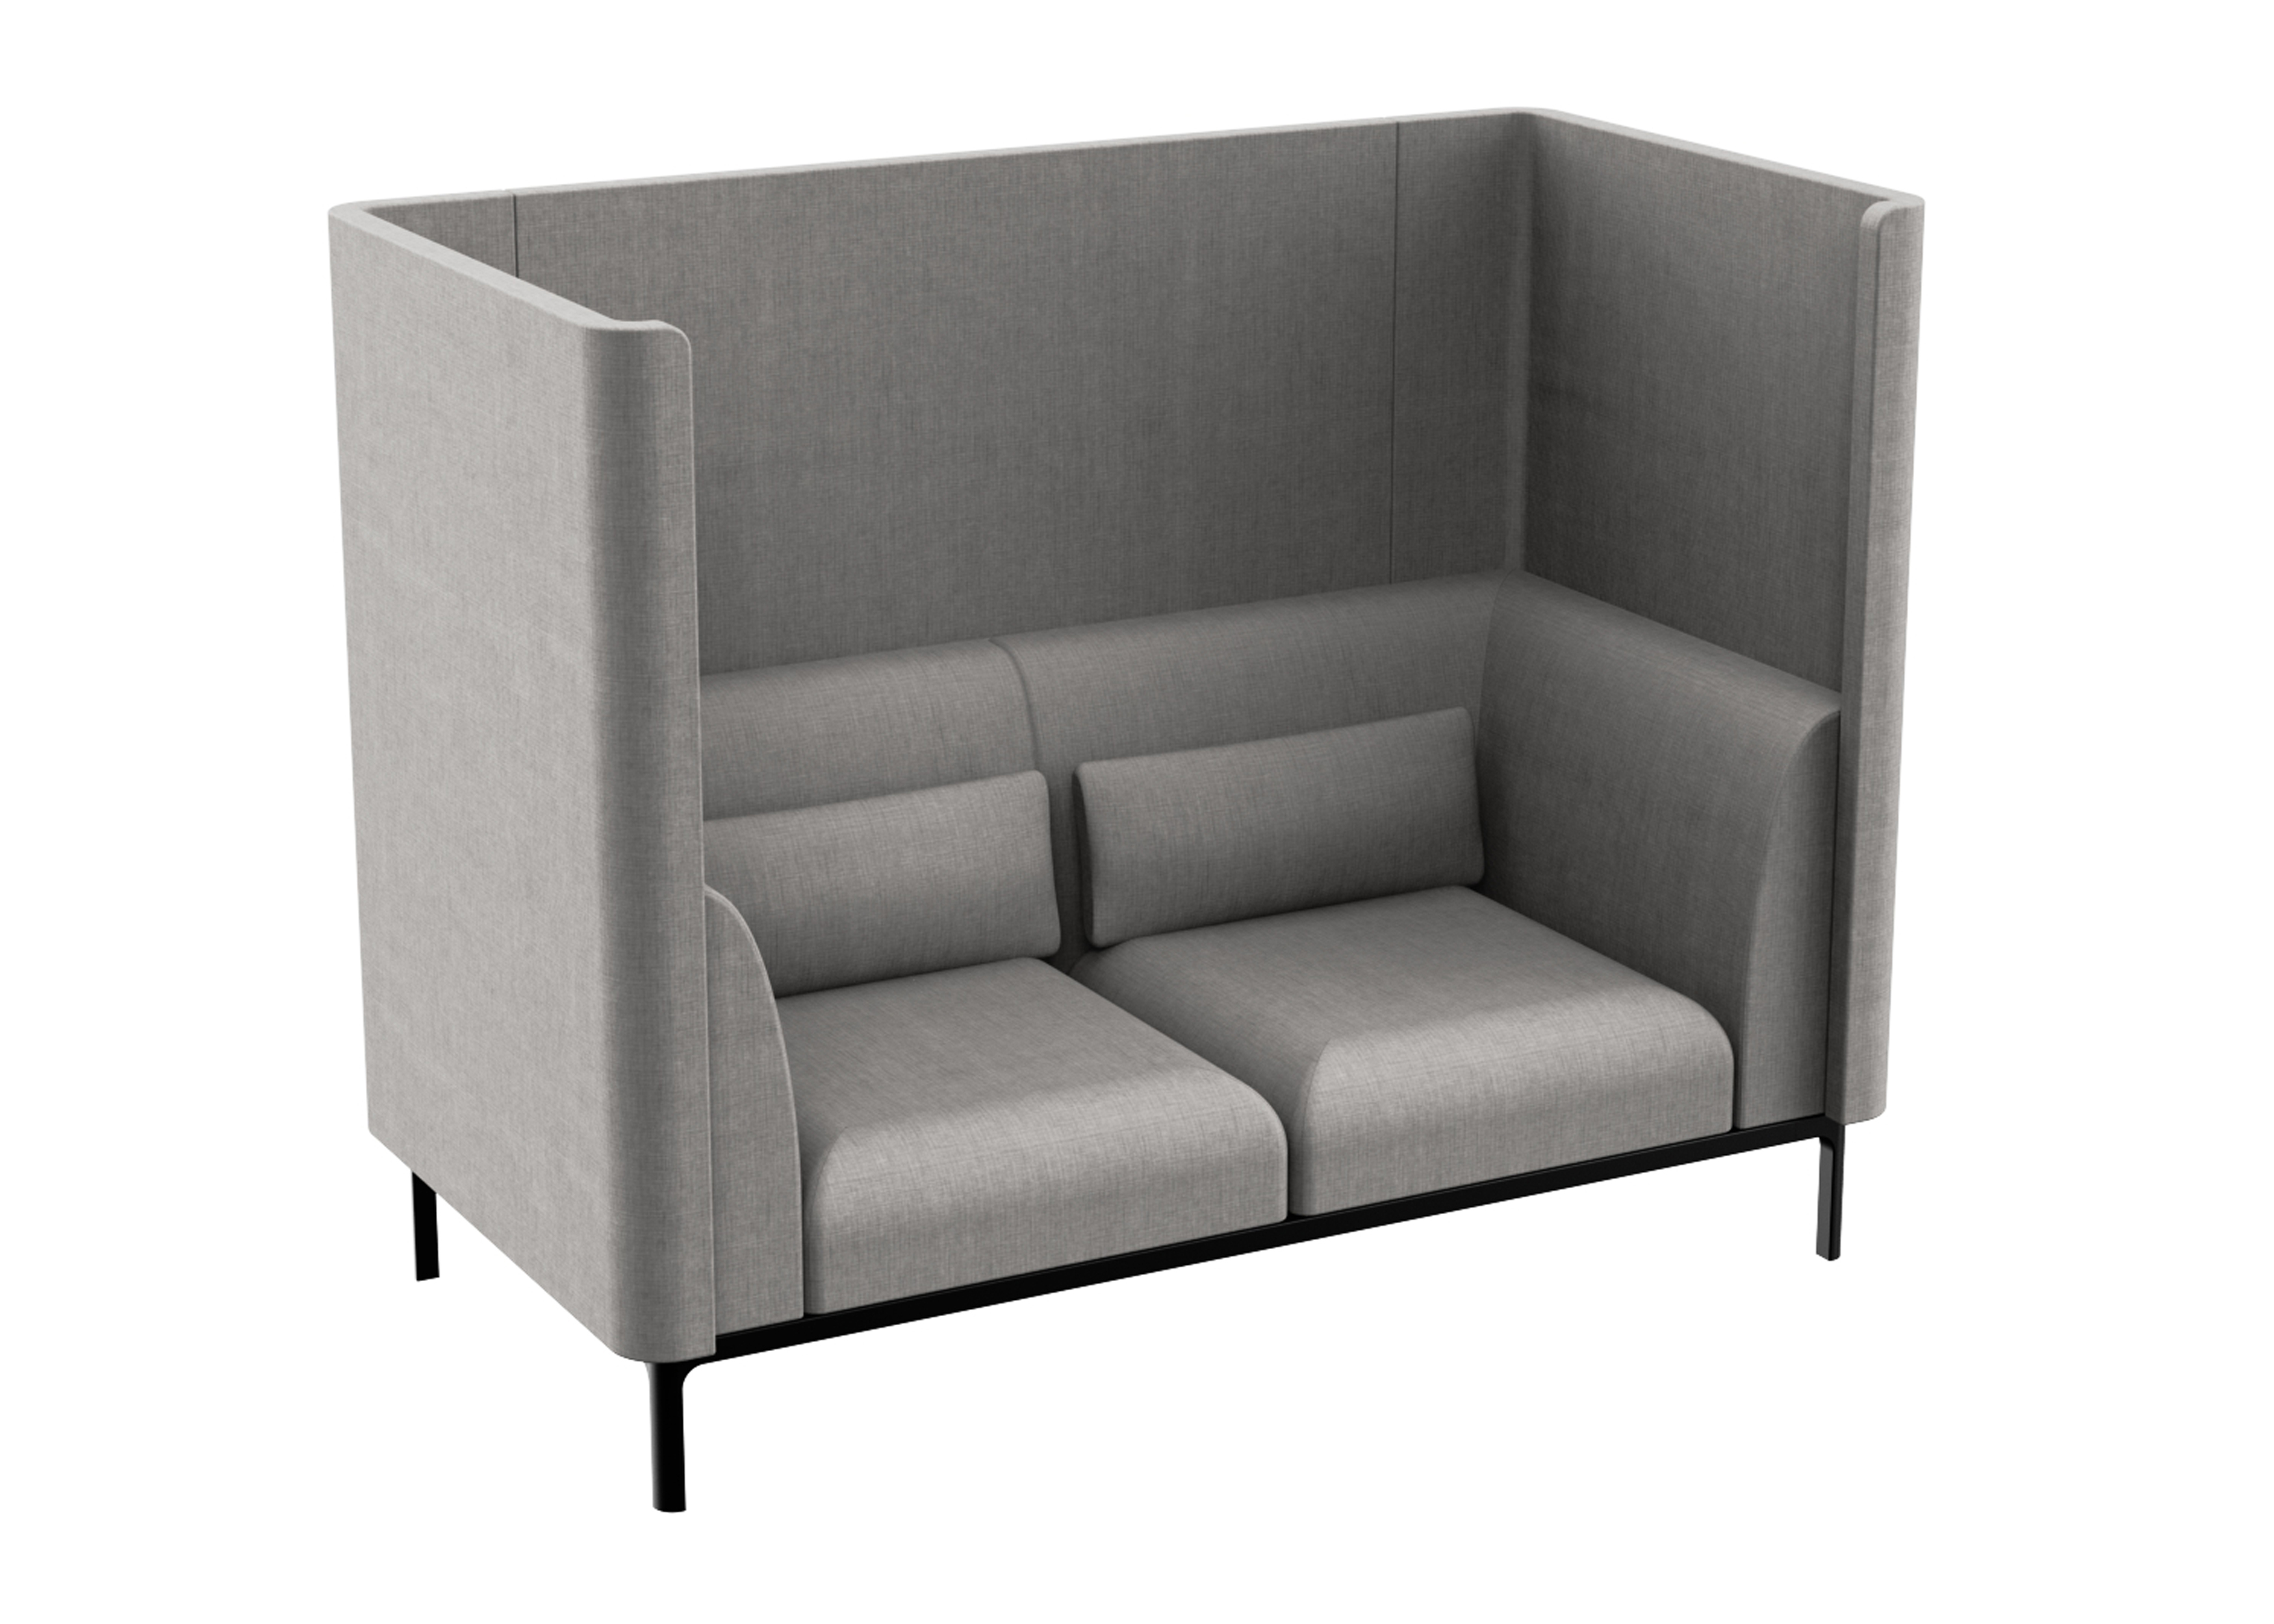 WS - Profile High Back - 2 Seater 2